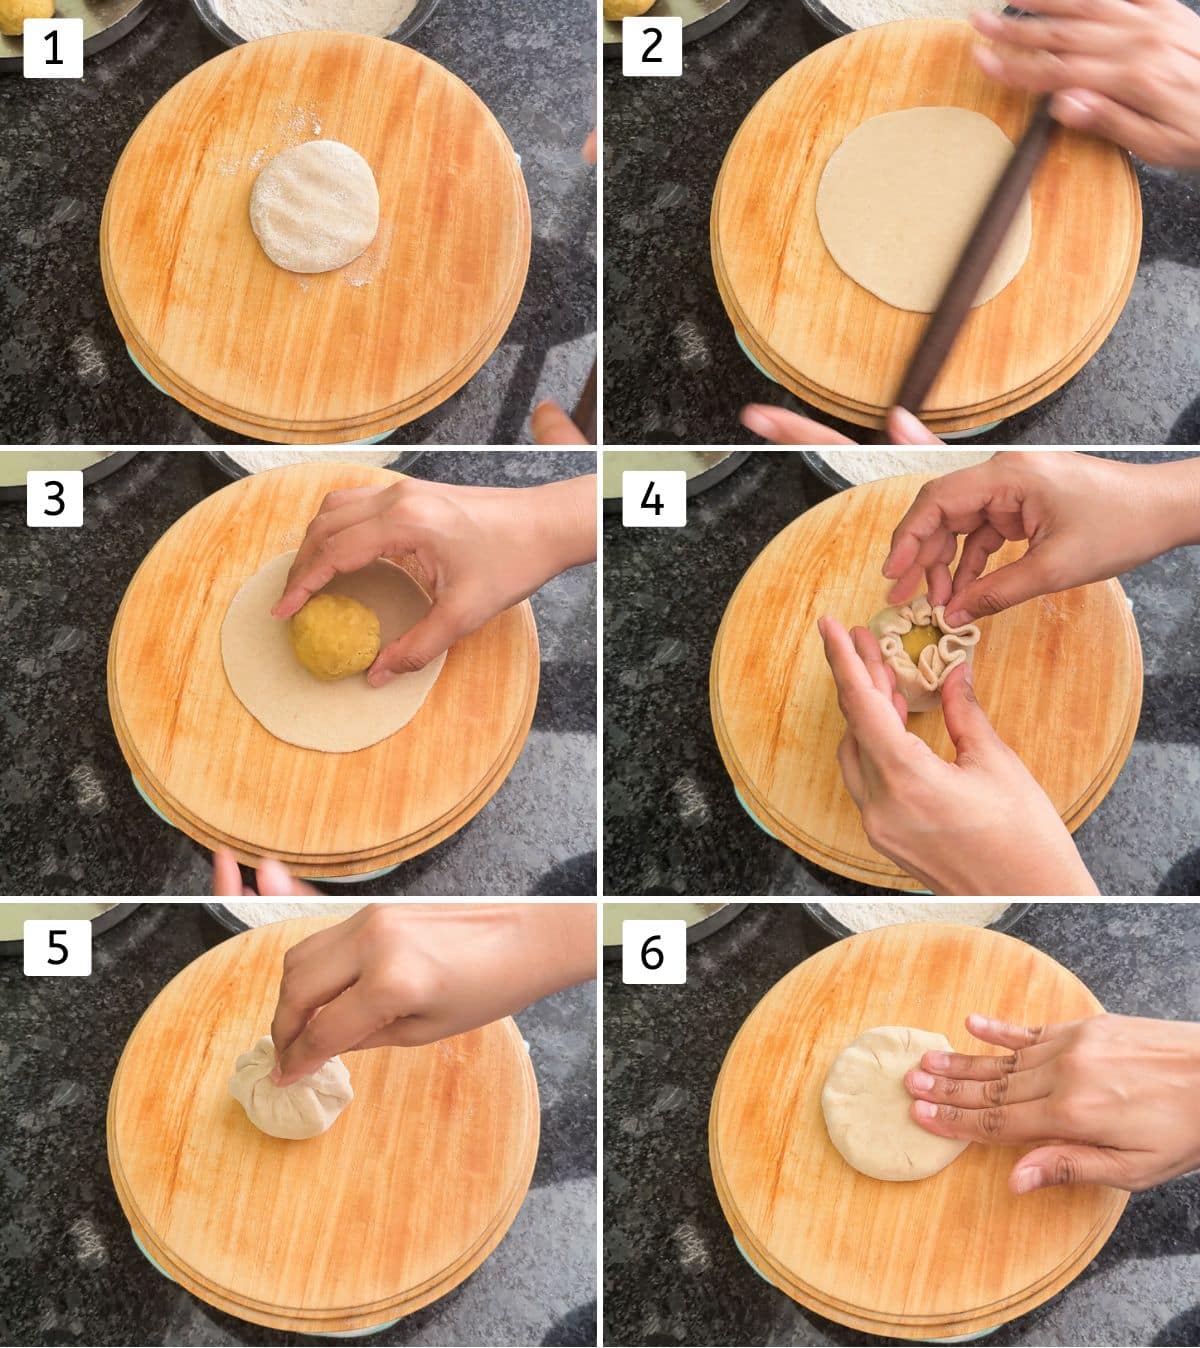 Collage of 4 images showing rolling dough ball, stuffing with puran and flattened it.